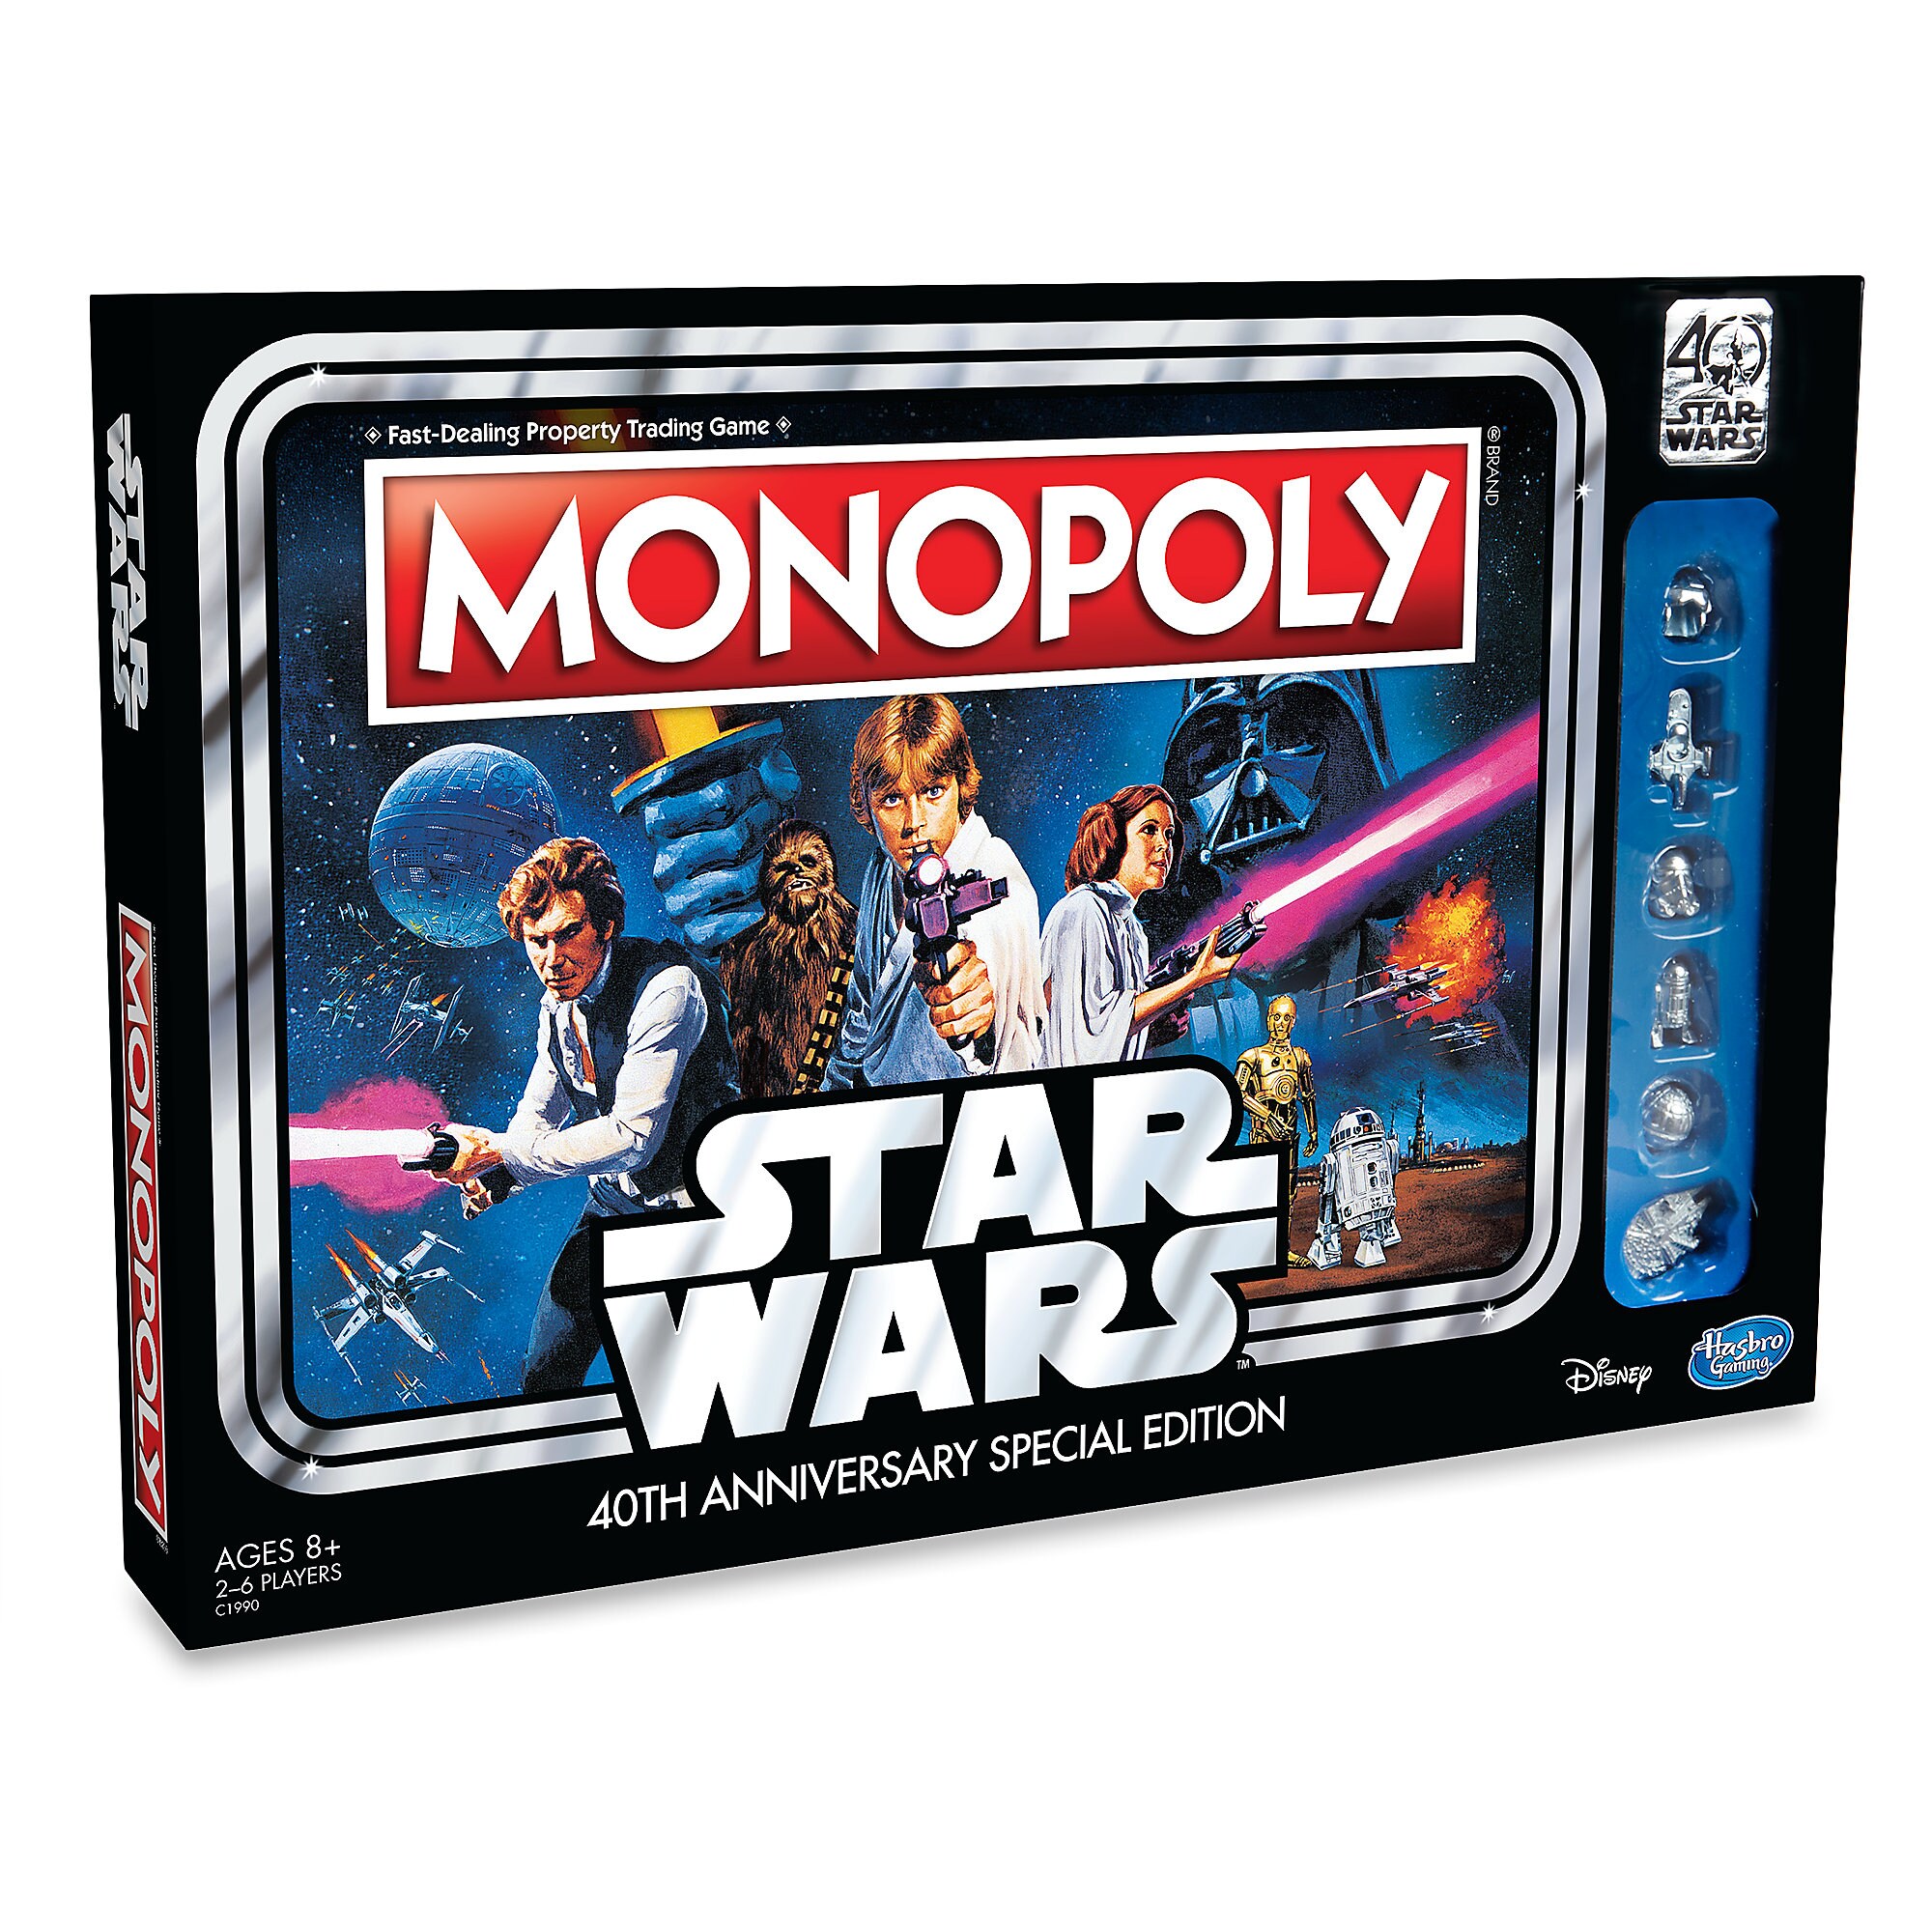 Stars Wars 40th Anniversary Special Edition Monopoly Game